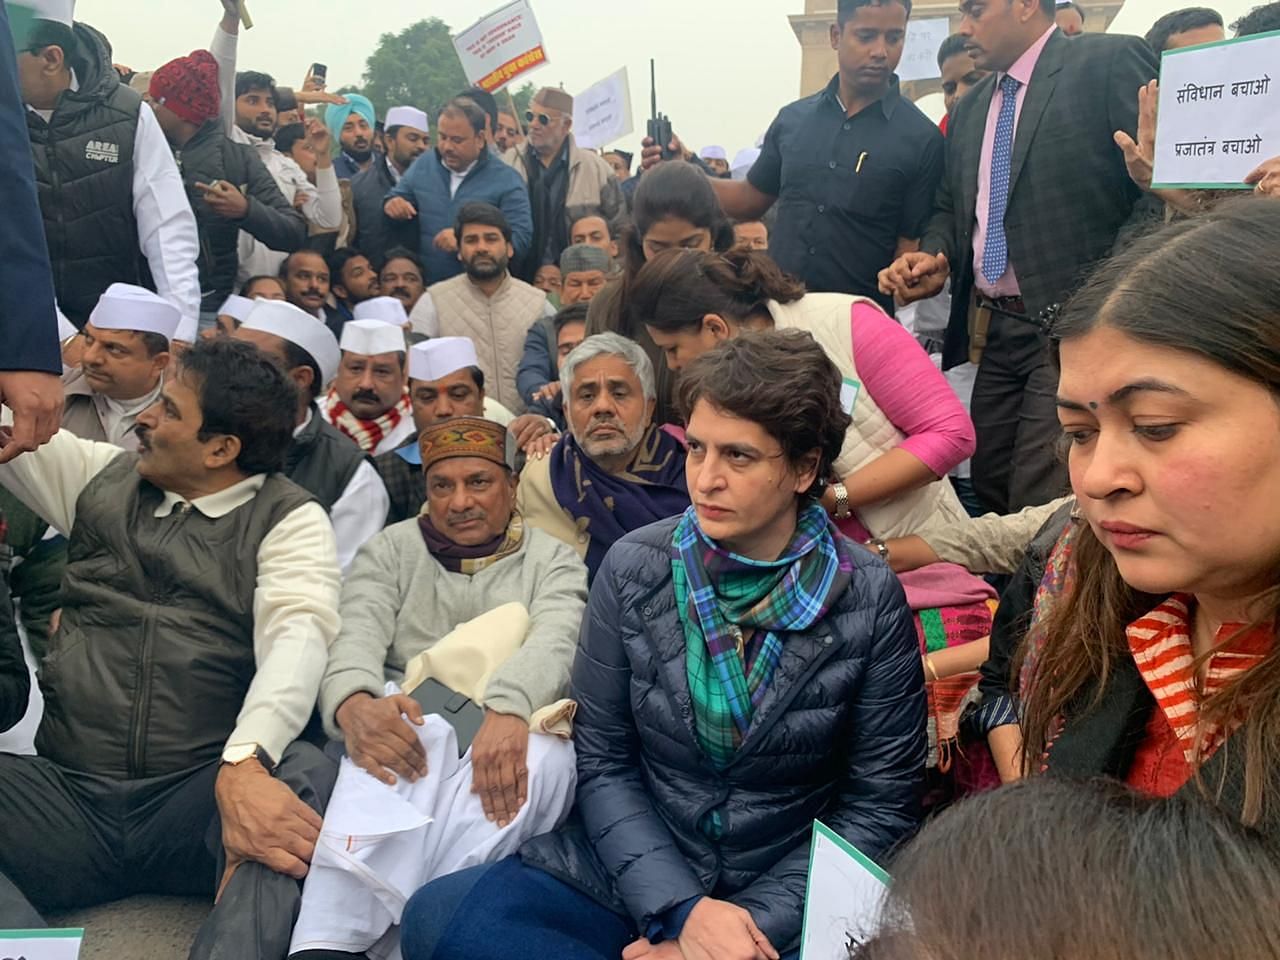 Congress leaders Priyanka Gandhi Vadra and others stage sit-in protest at India Gate to express solidarity with students agitating against Citizenship Amendment Act